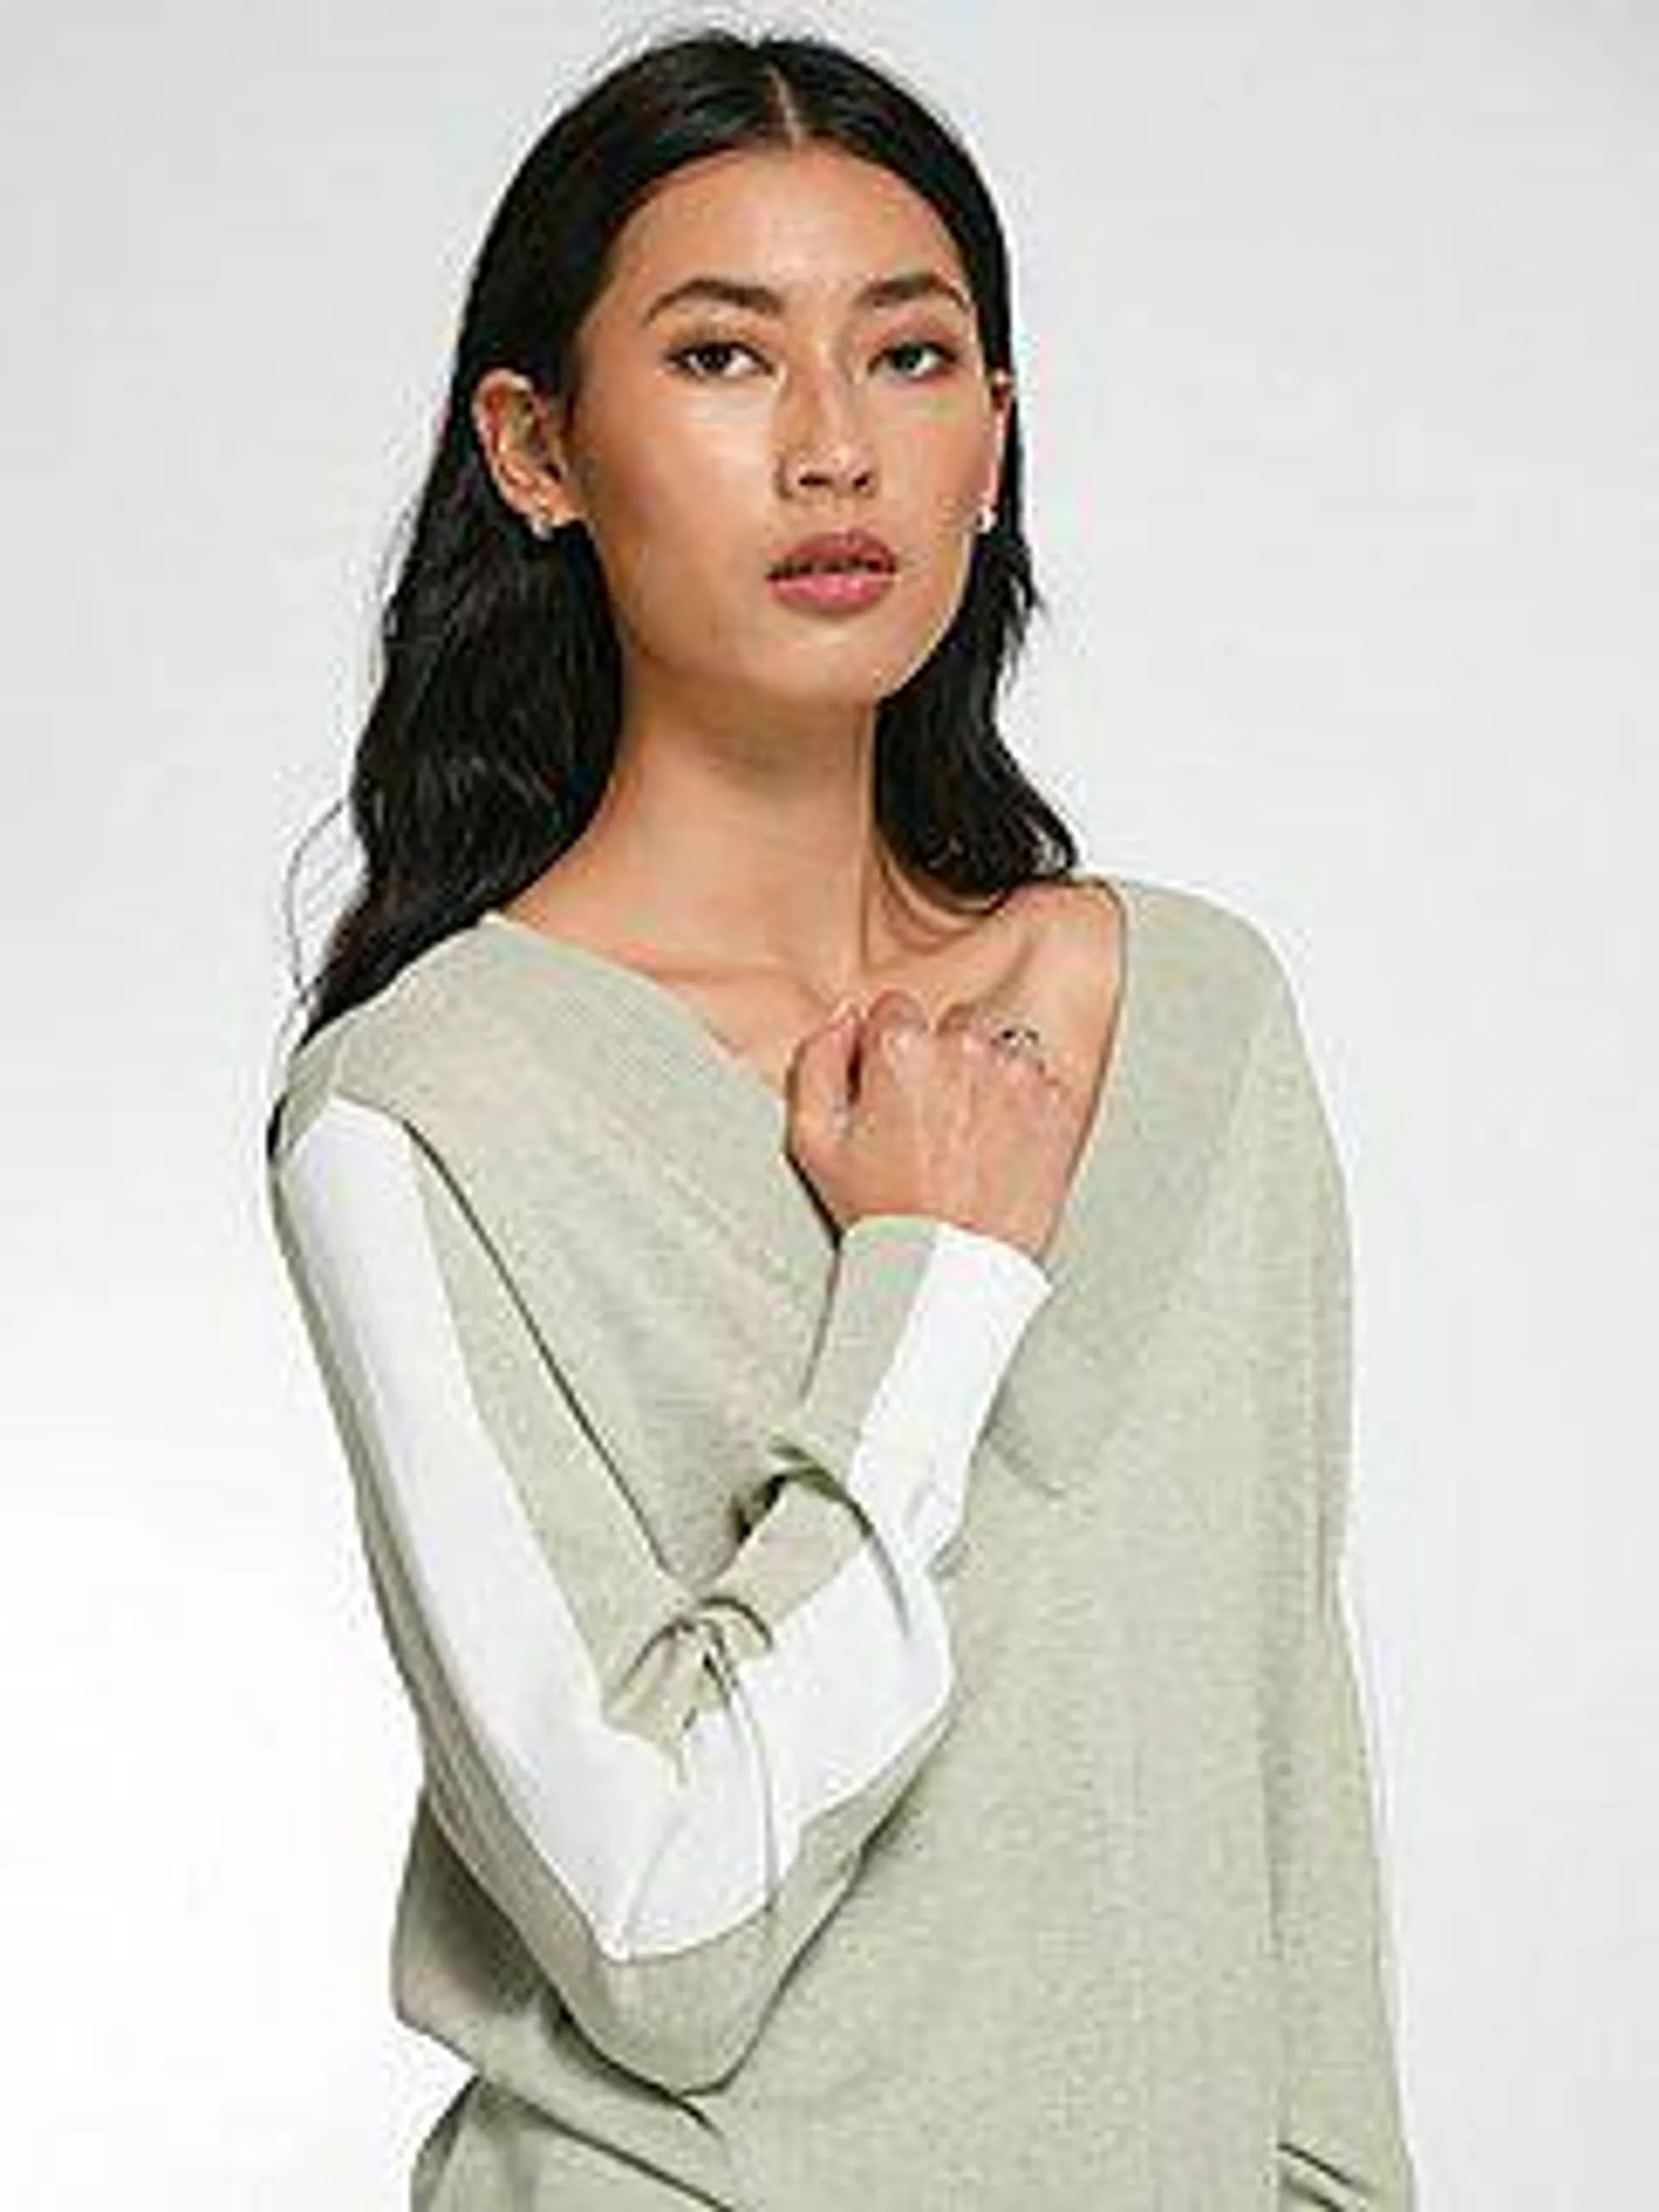 Jumper with long sleeves